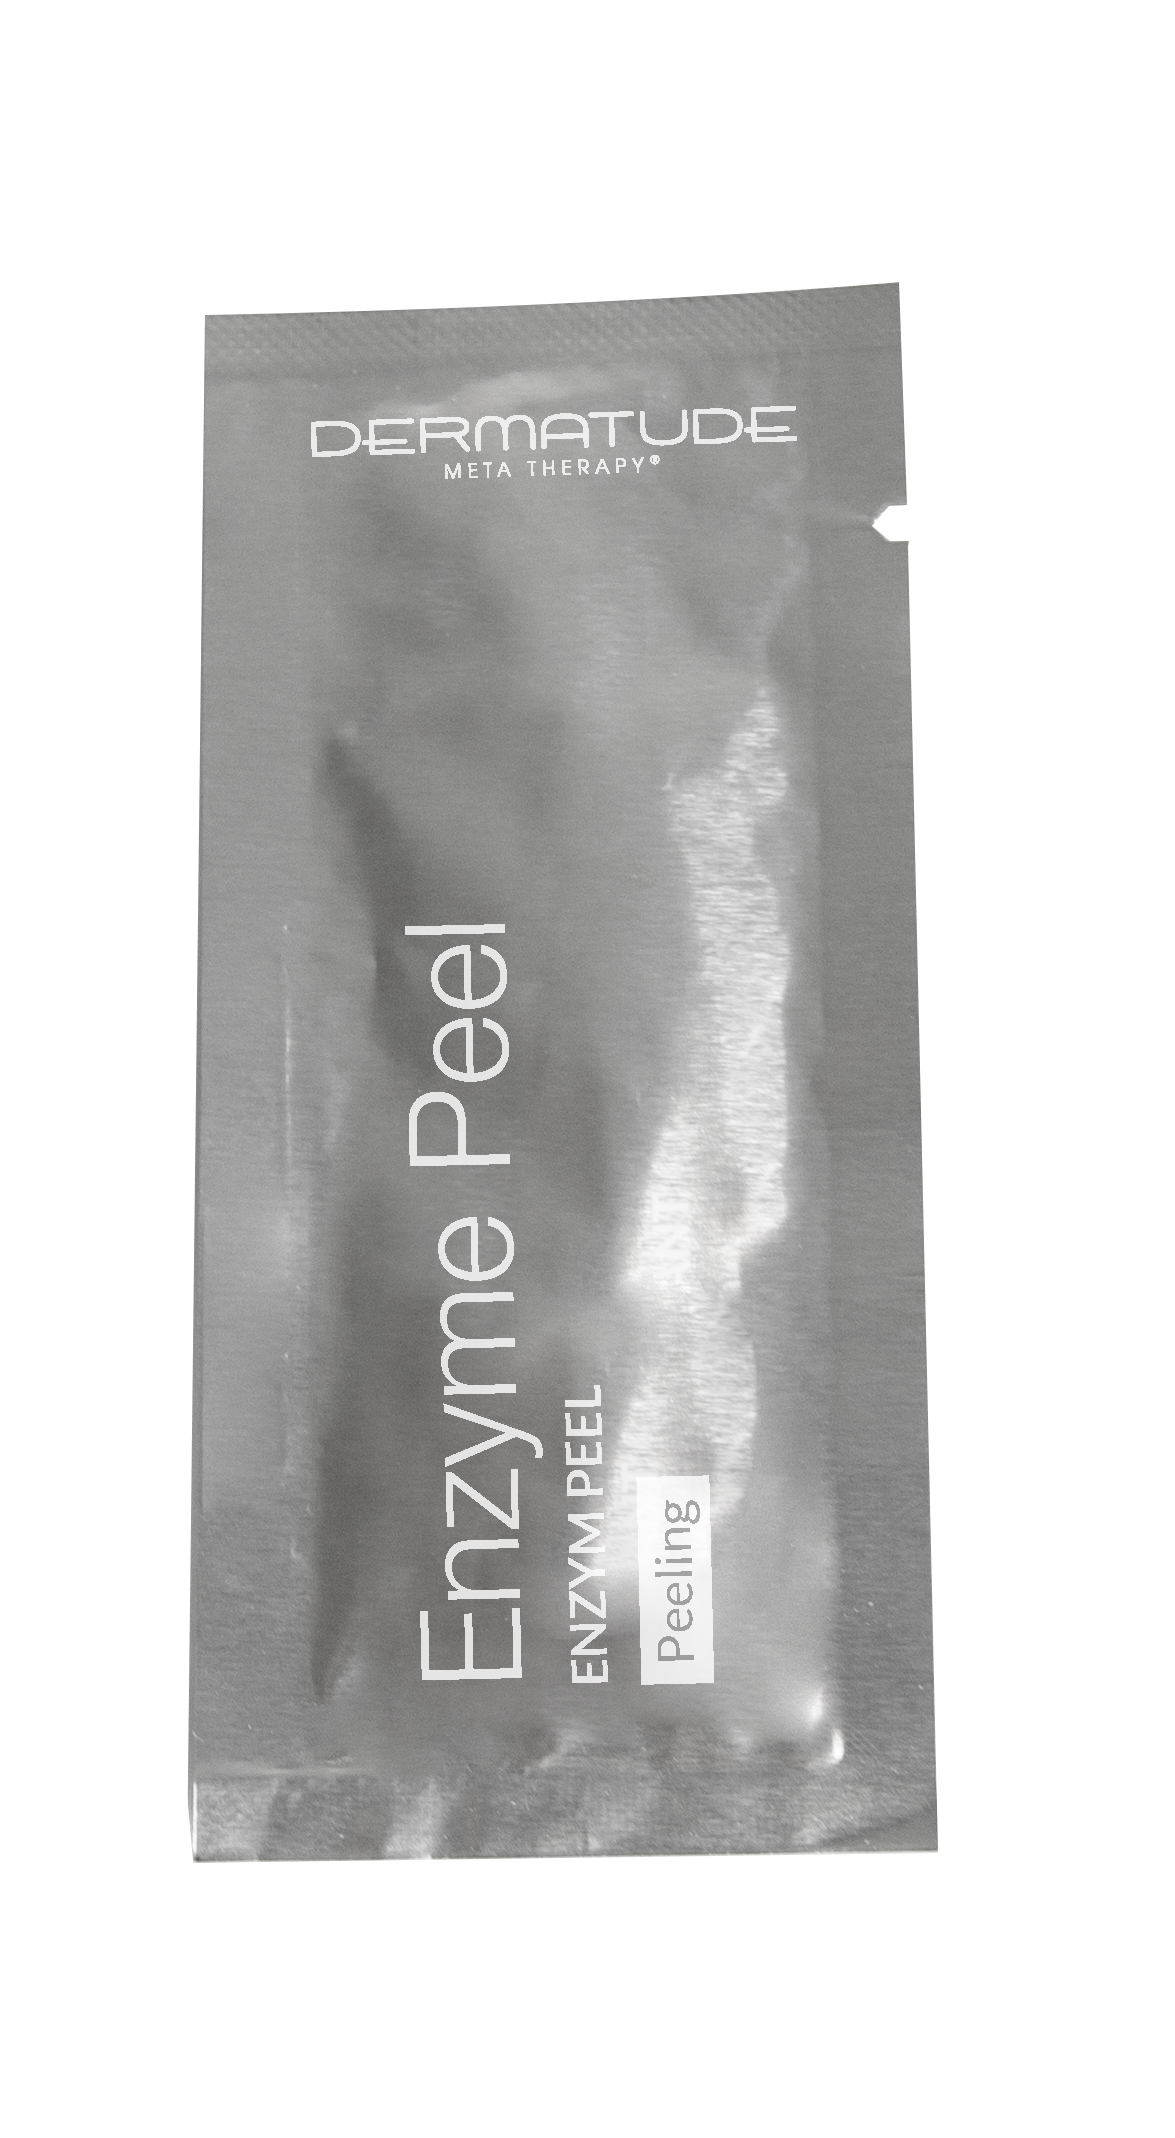 (DO NOT SELL) Dermatude Enzyme Peel Sample 2 ml - Box of 100 Pieces